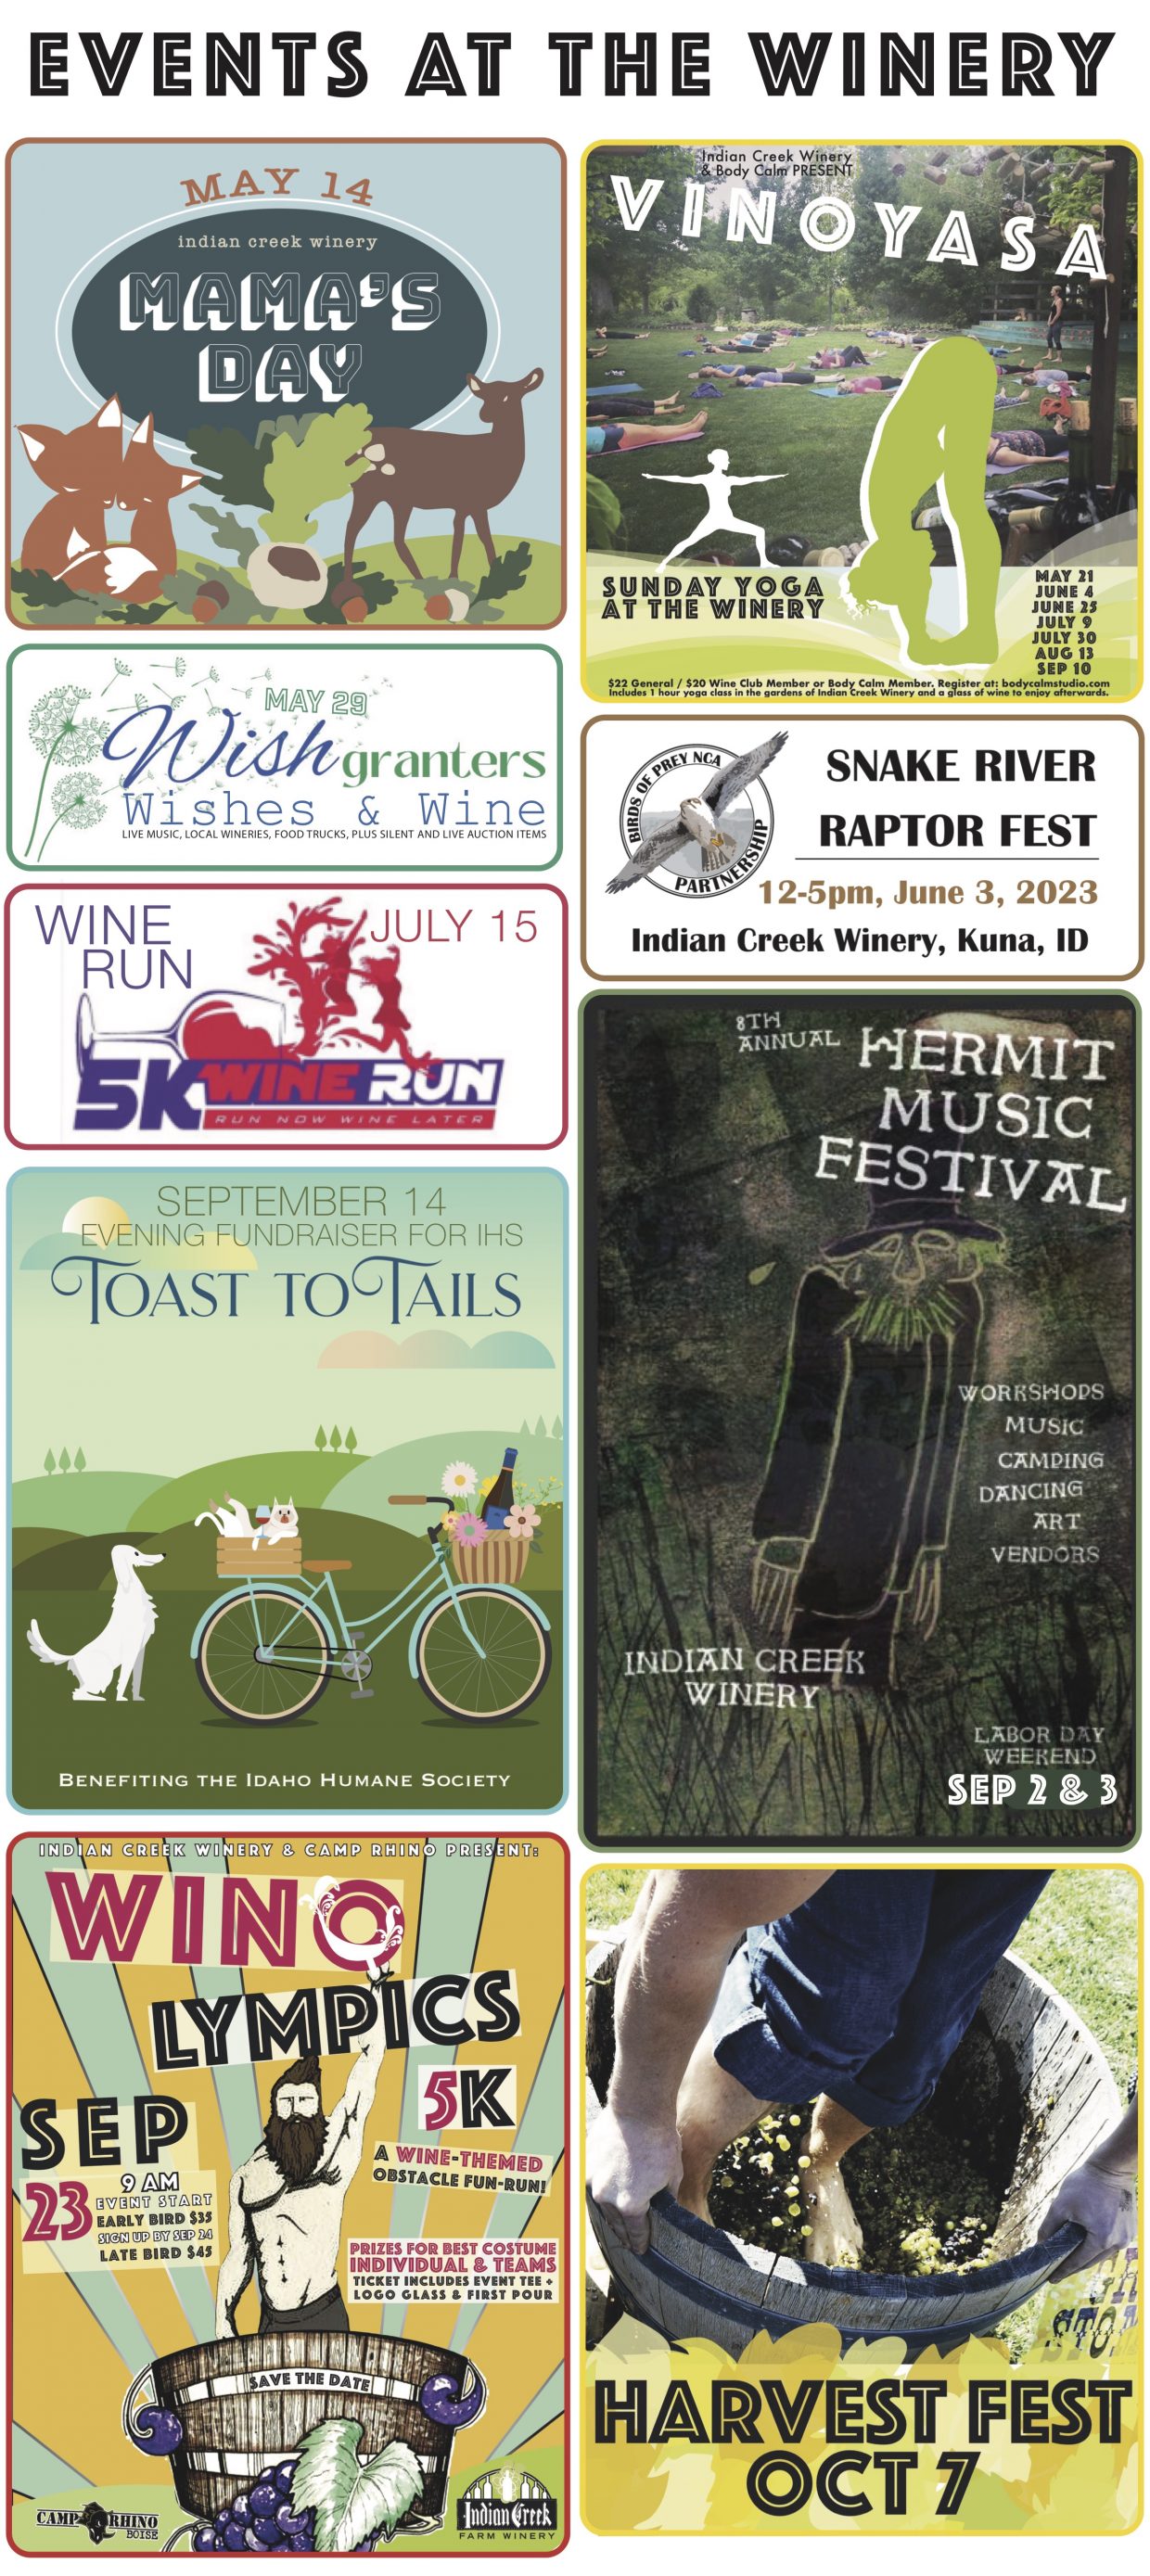 Annual events at the Winery